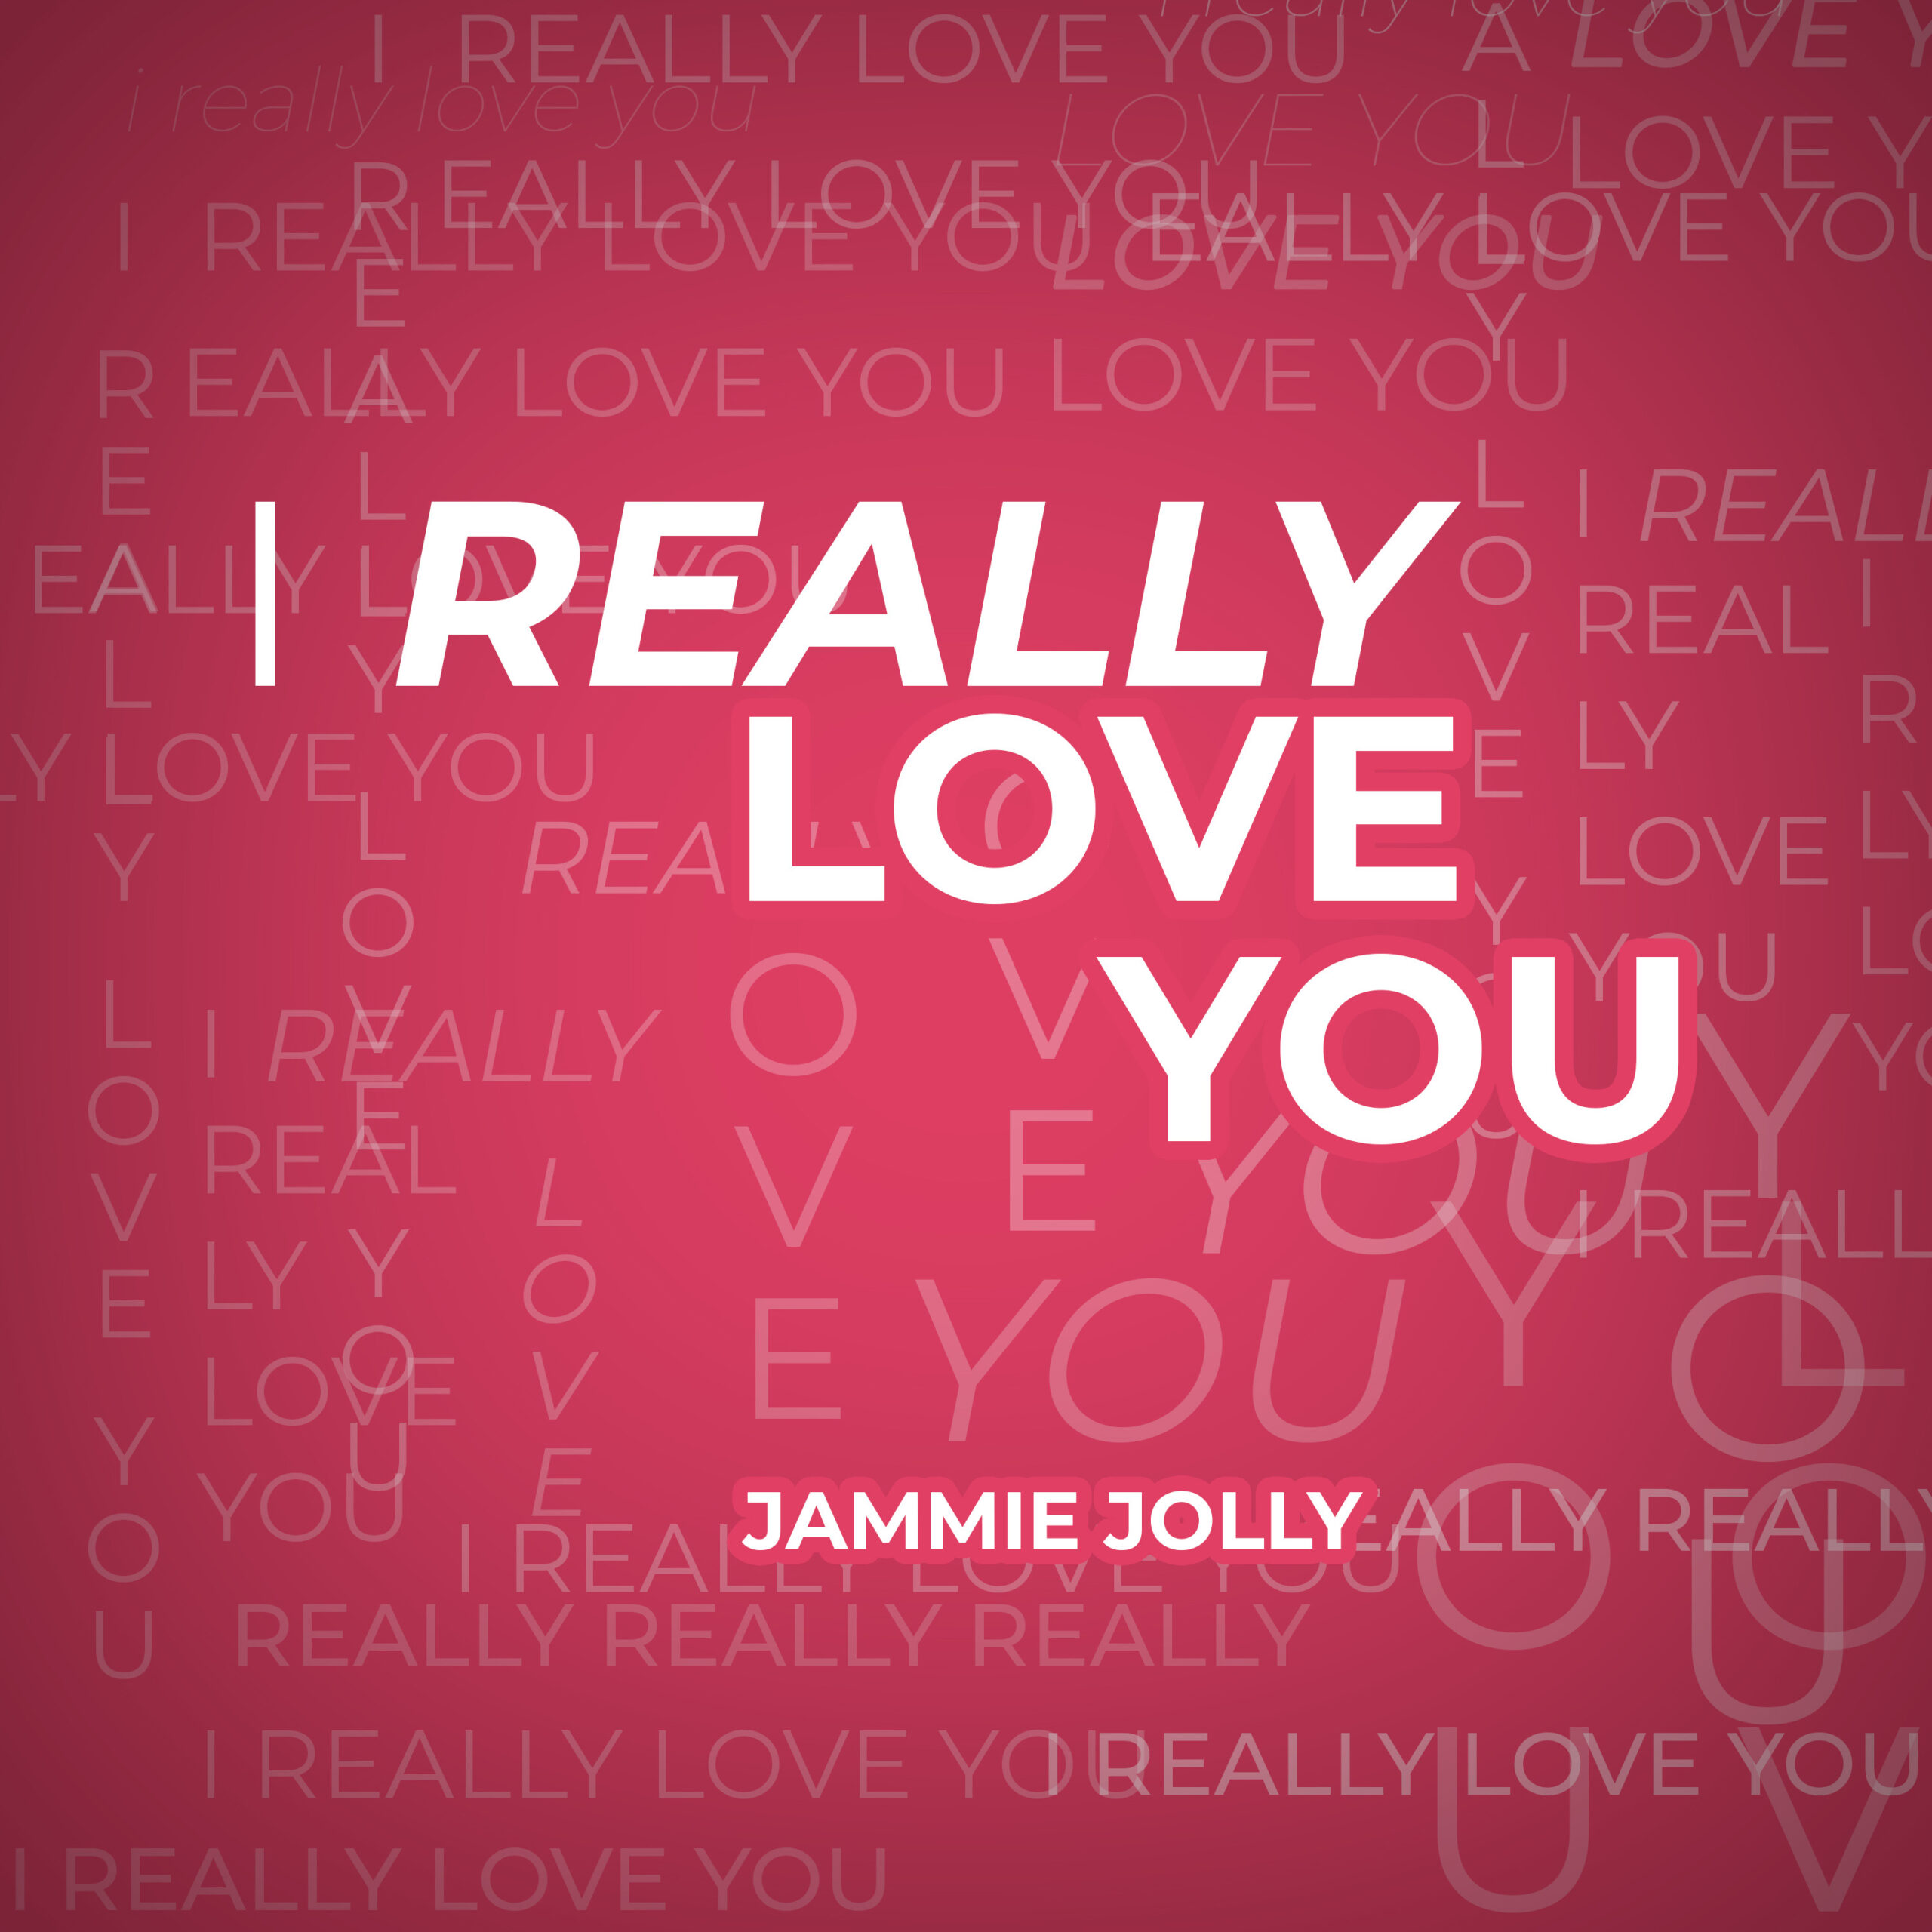 New Music “I Really Love You”